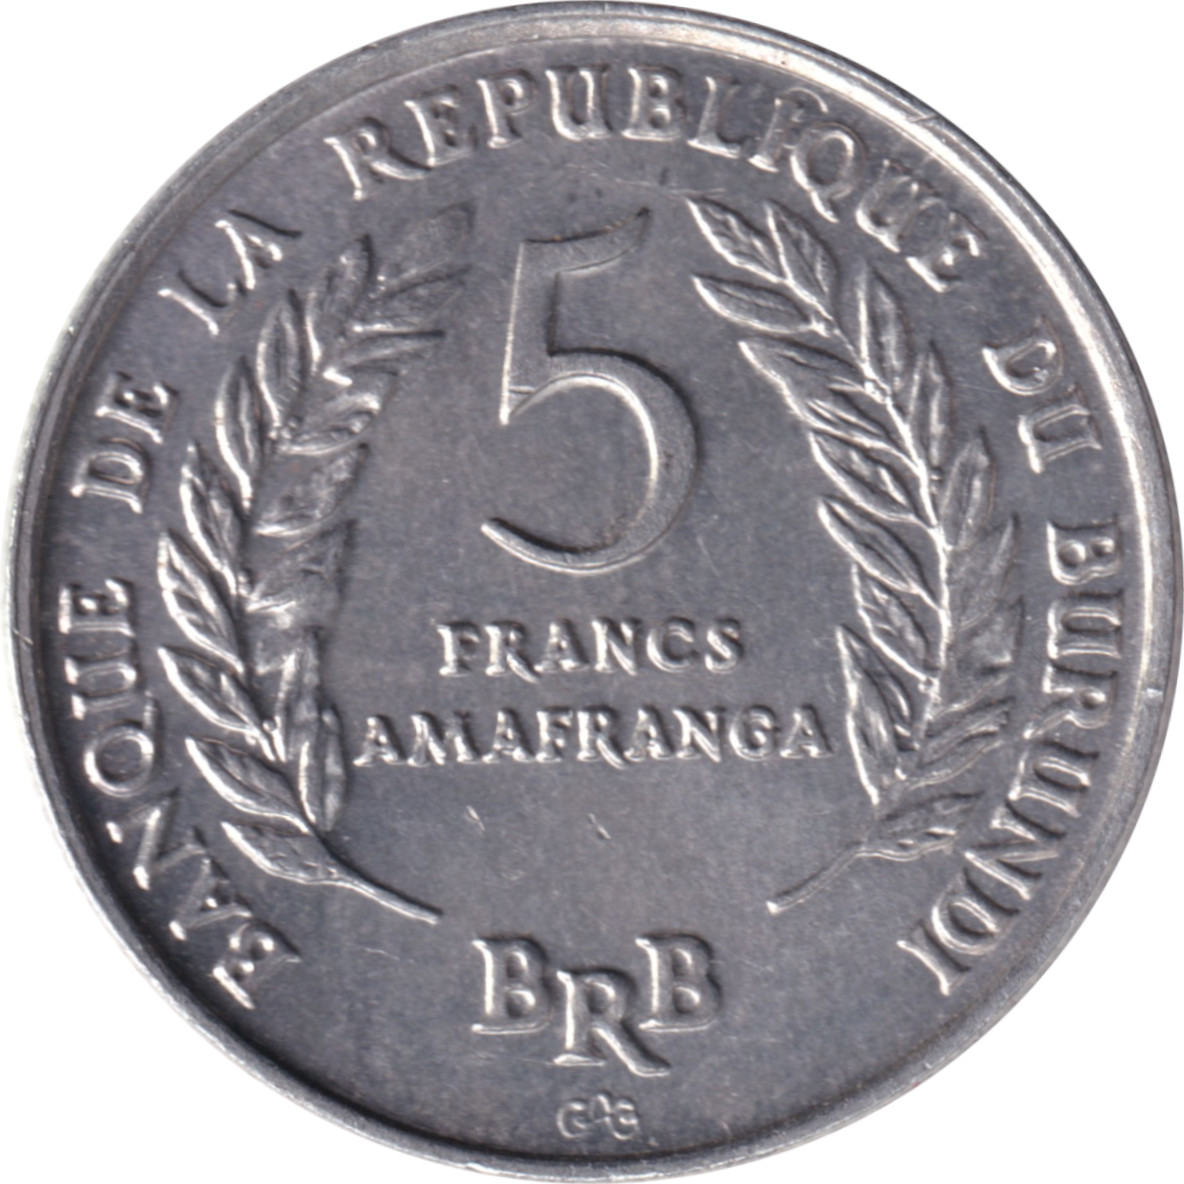 5 francs - Branches